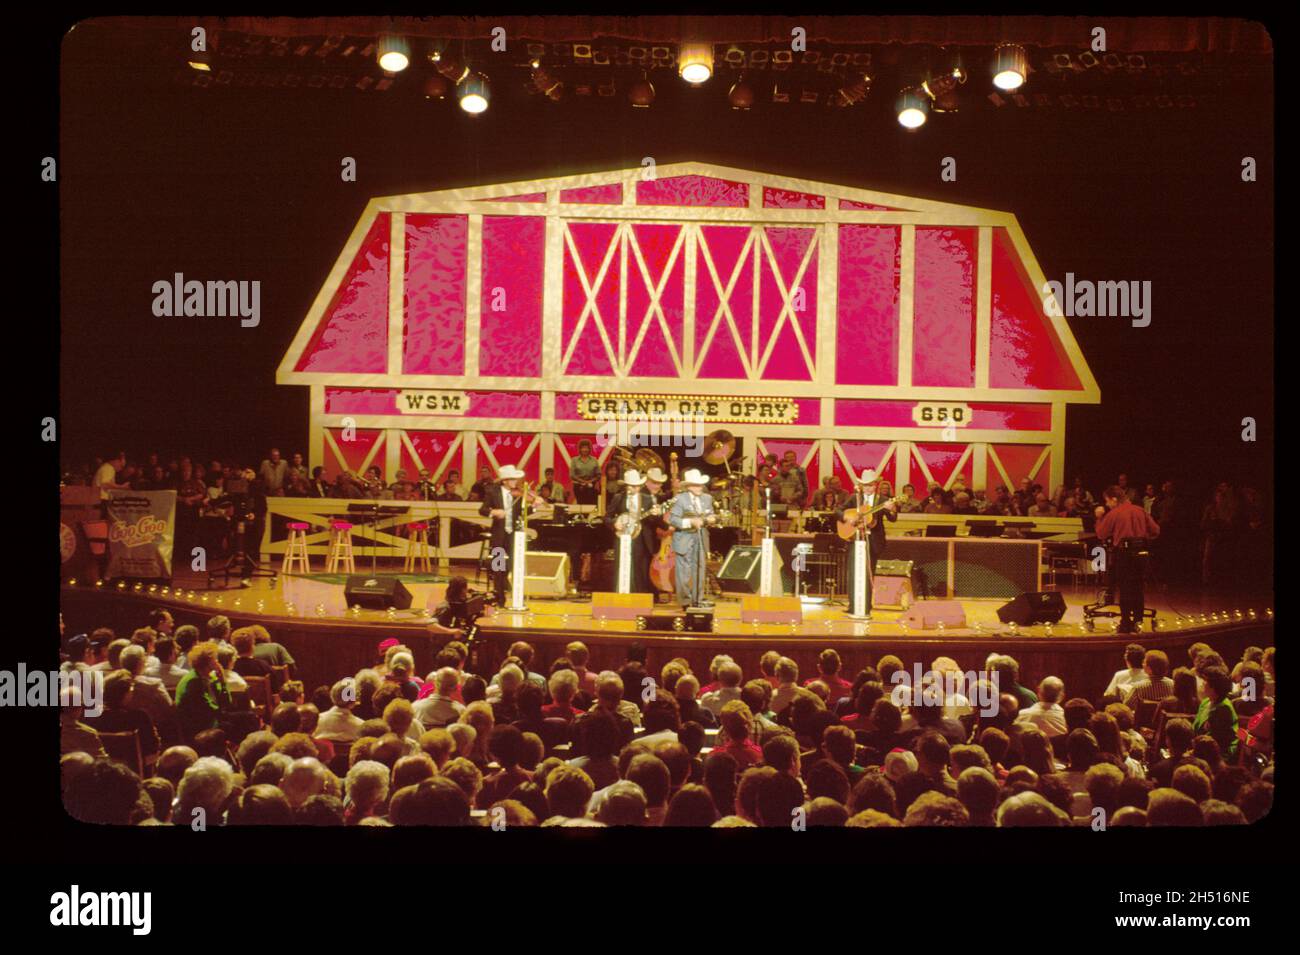 Nashville Tennessee,country music,Grand Ole Opry House,Bill Monroe performing Father of Bluegrass,stage musicians performers preformance audience fans Stock Photo